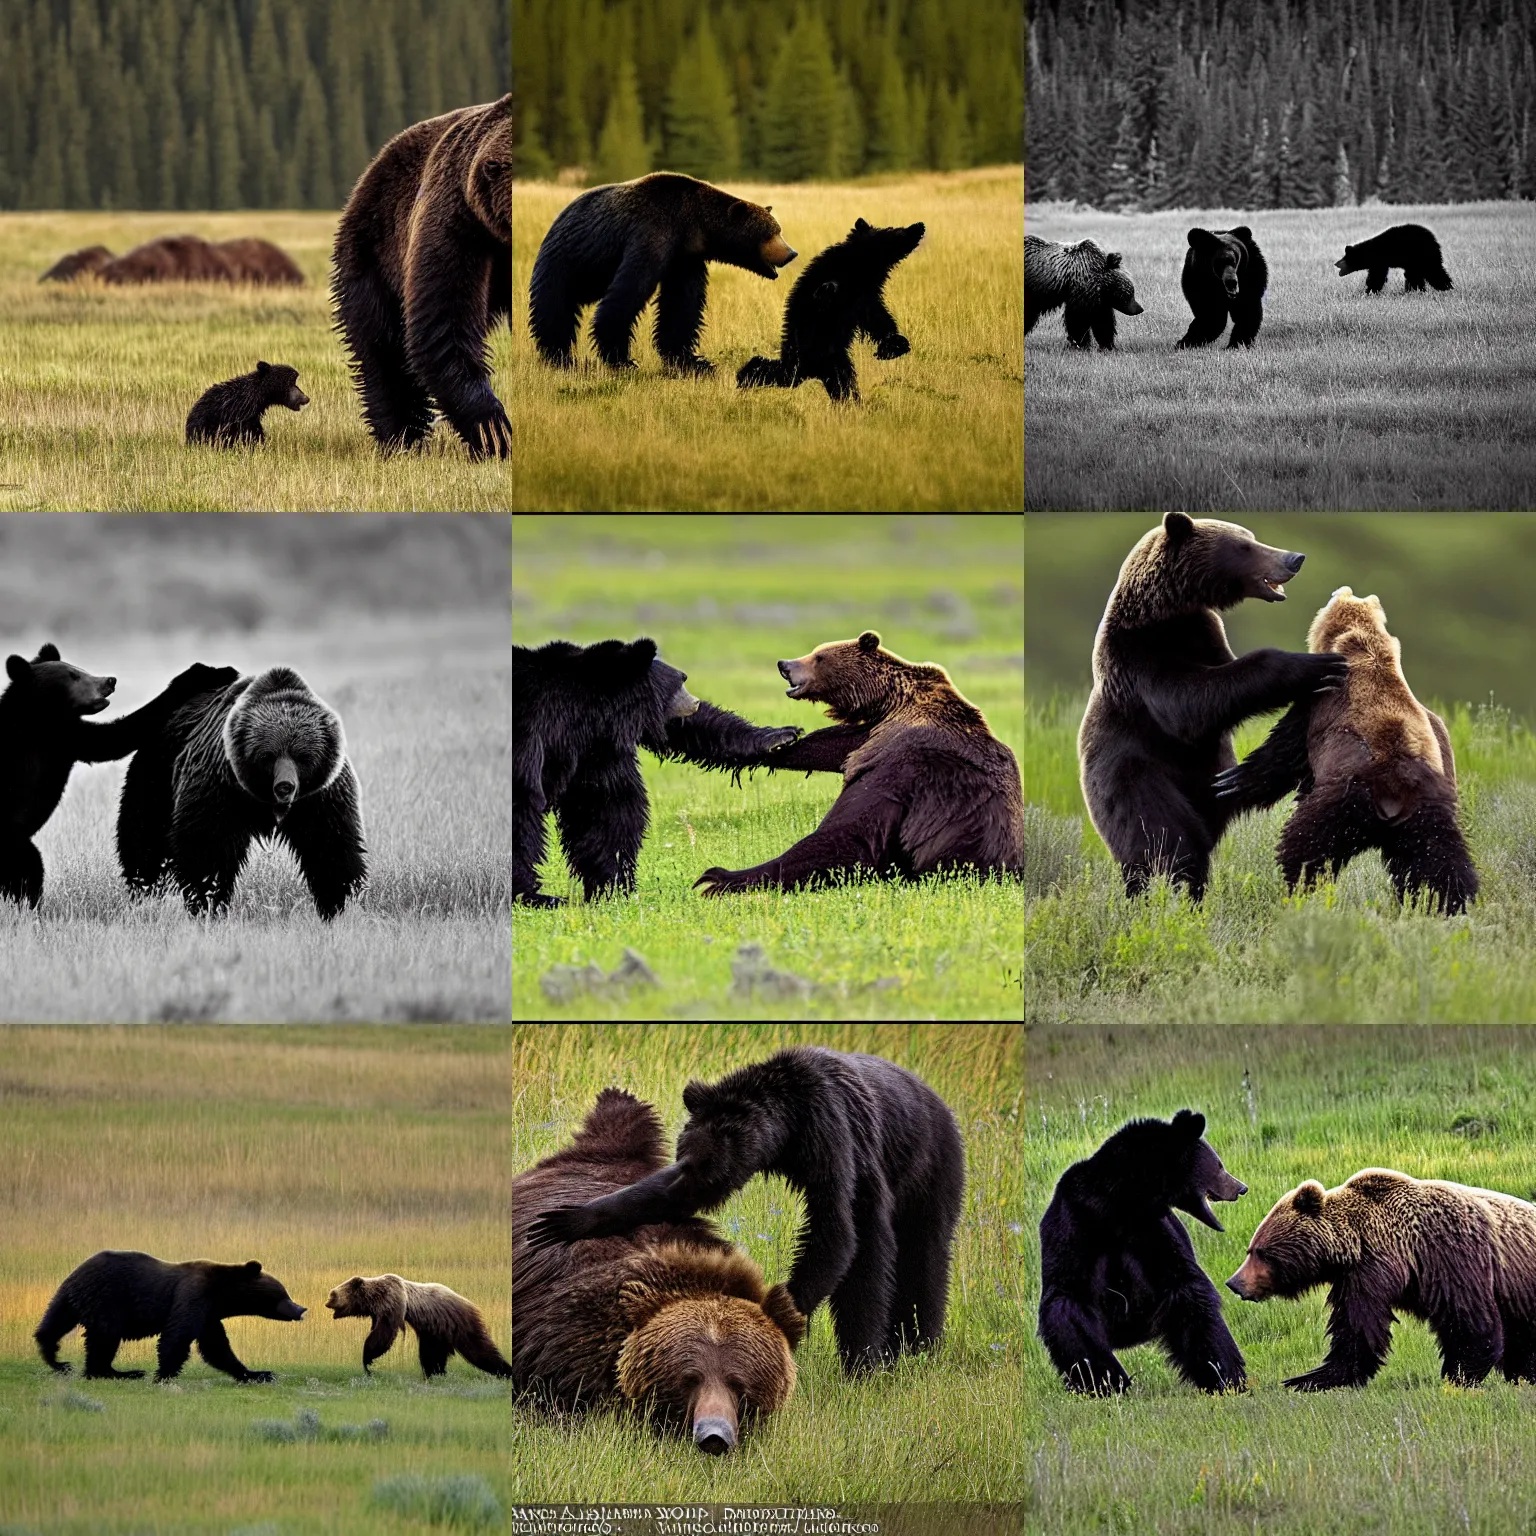 Prompt: large black spider vs grizzly bear in a meadow, wildlife photography